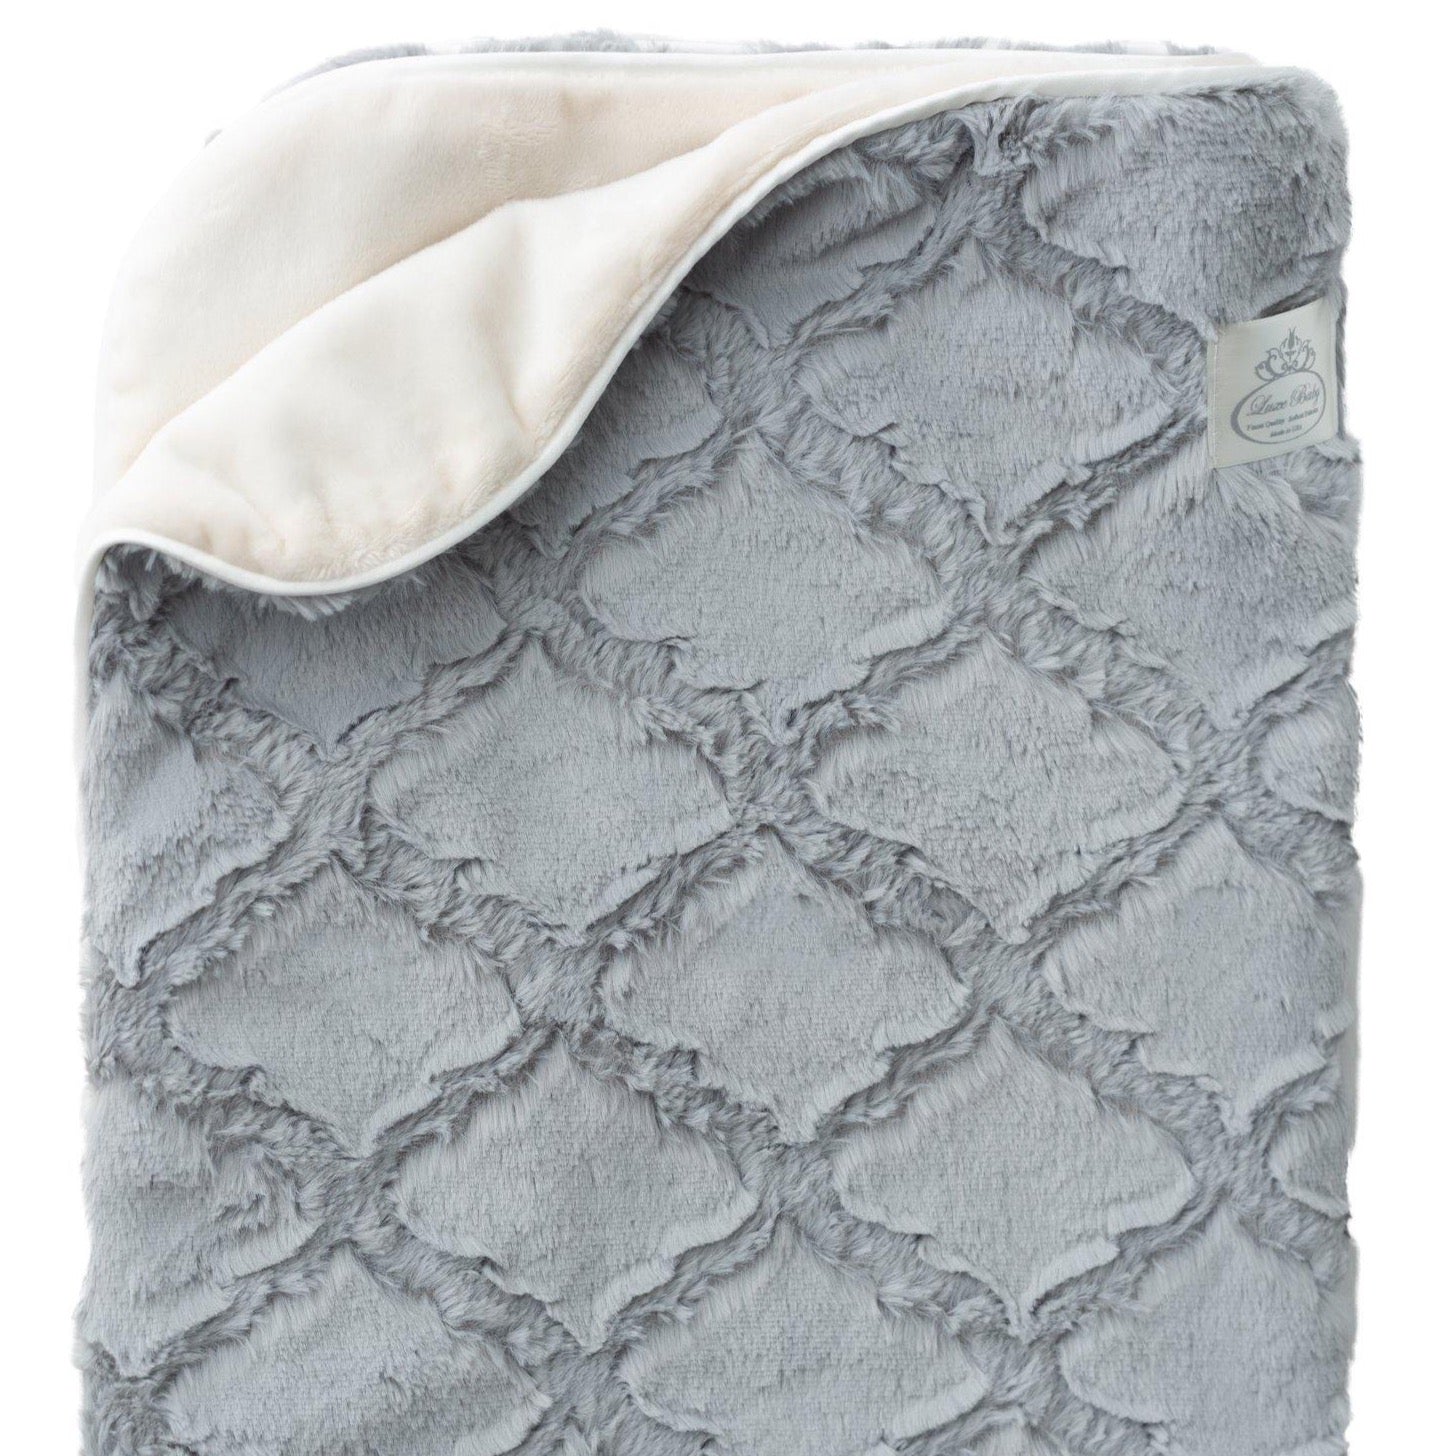 NEW! Luxury Plush Diamond Texture Baby Blanket - Grey - Shop baby blankets, baby shower gifts, newborn baby clothes & more..